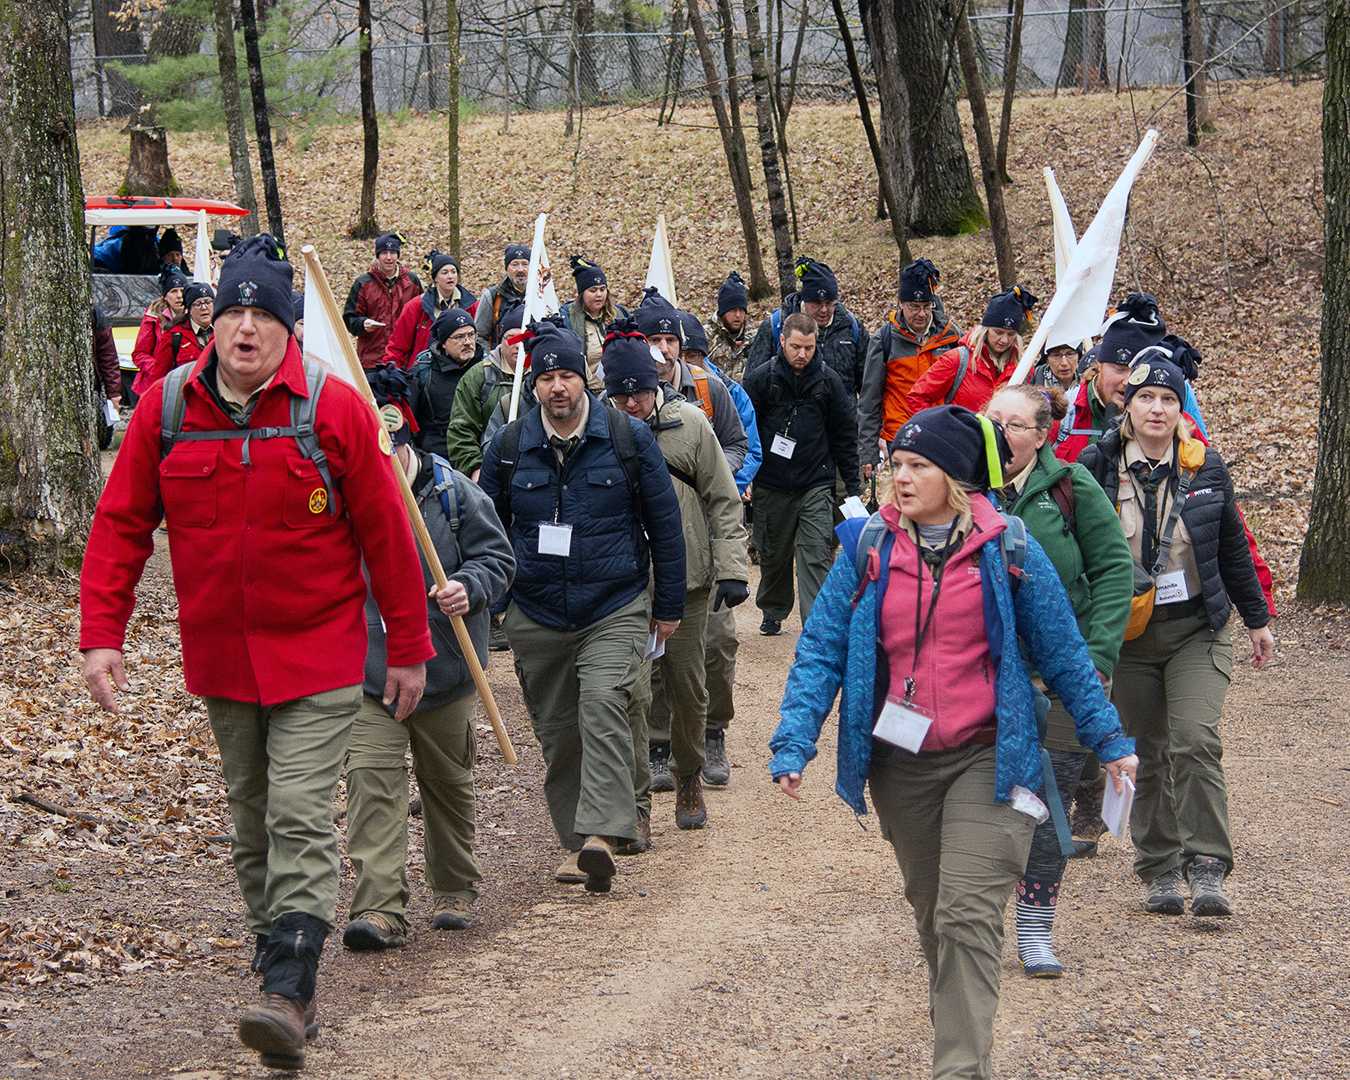 A Wood Badge course leader leads a hike for a a class. Twenty-five or so participants are following in two lines.